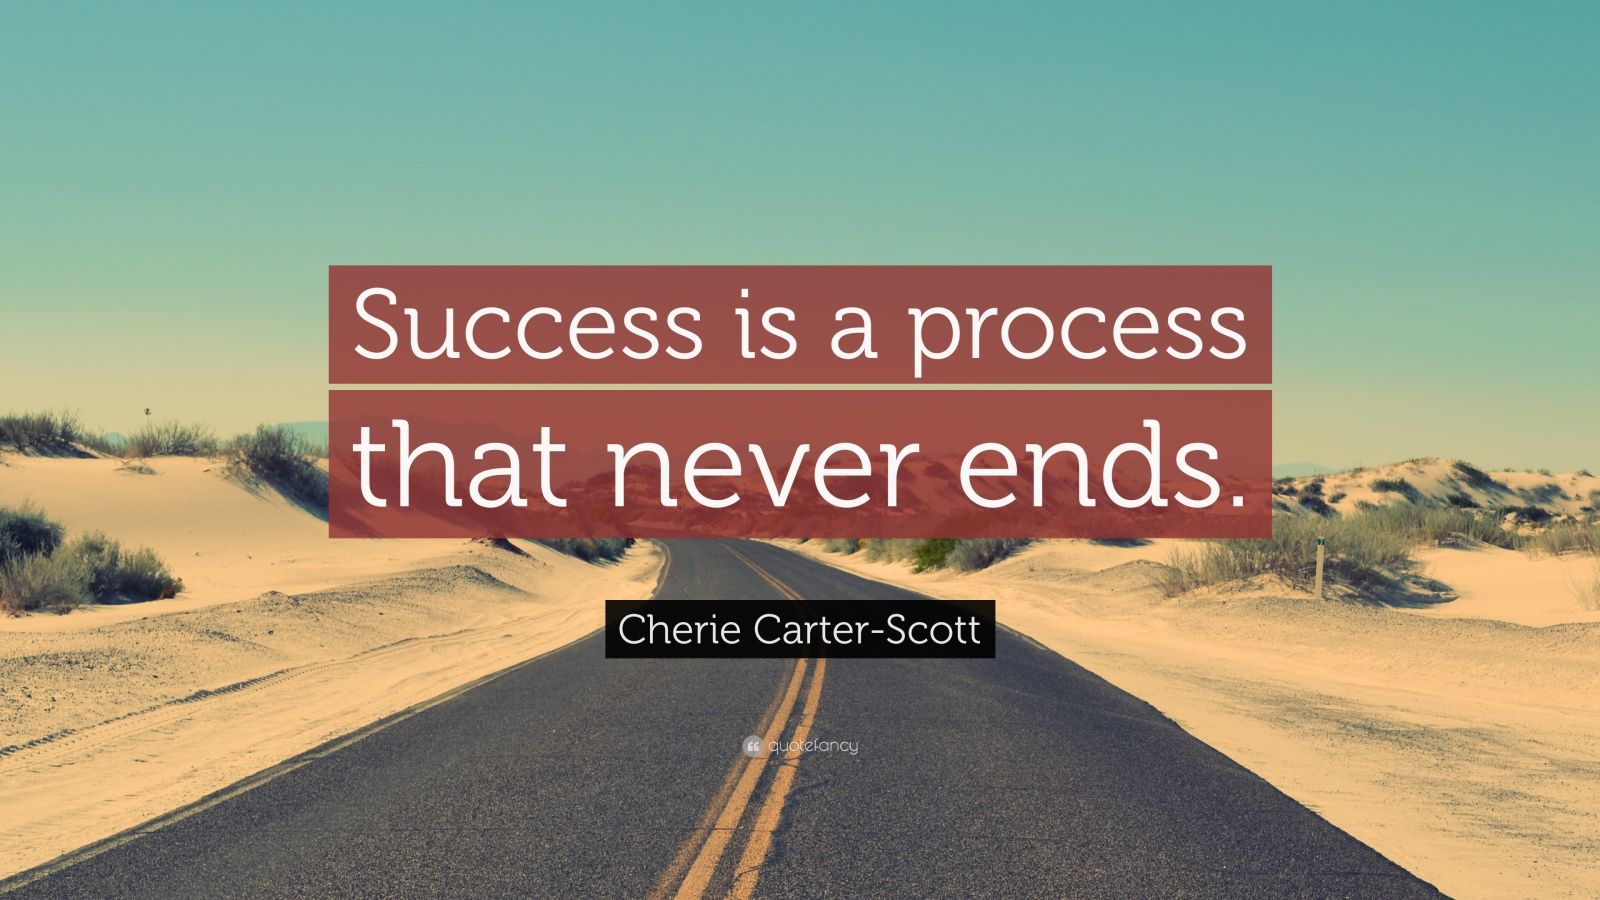 Cherie Carter-Scott Quote: “Success is a process that never ends.”